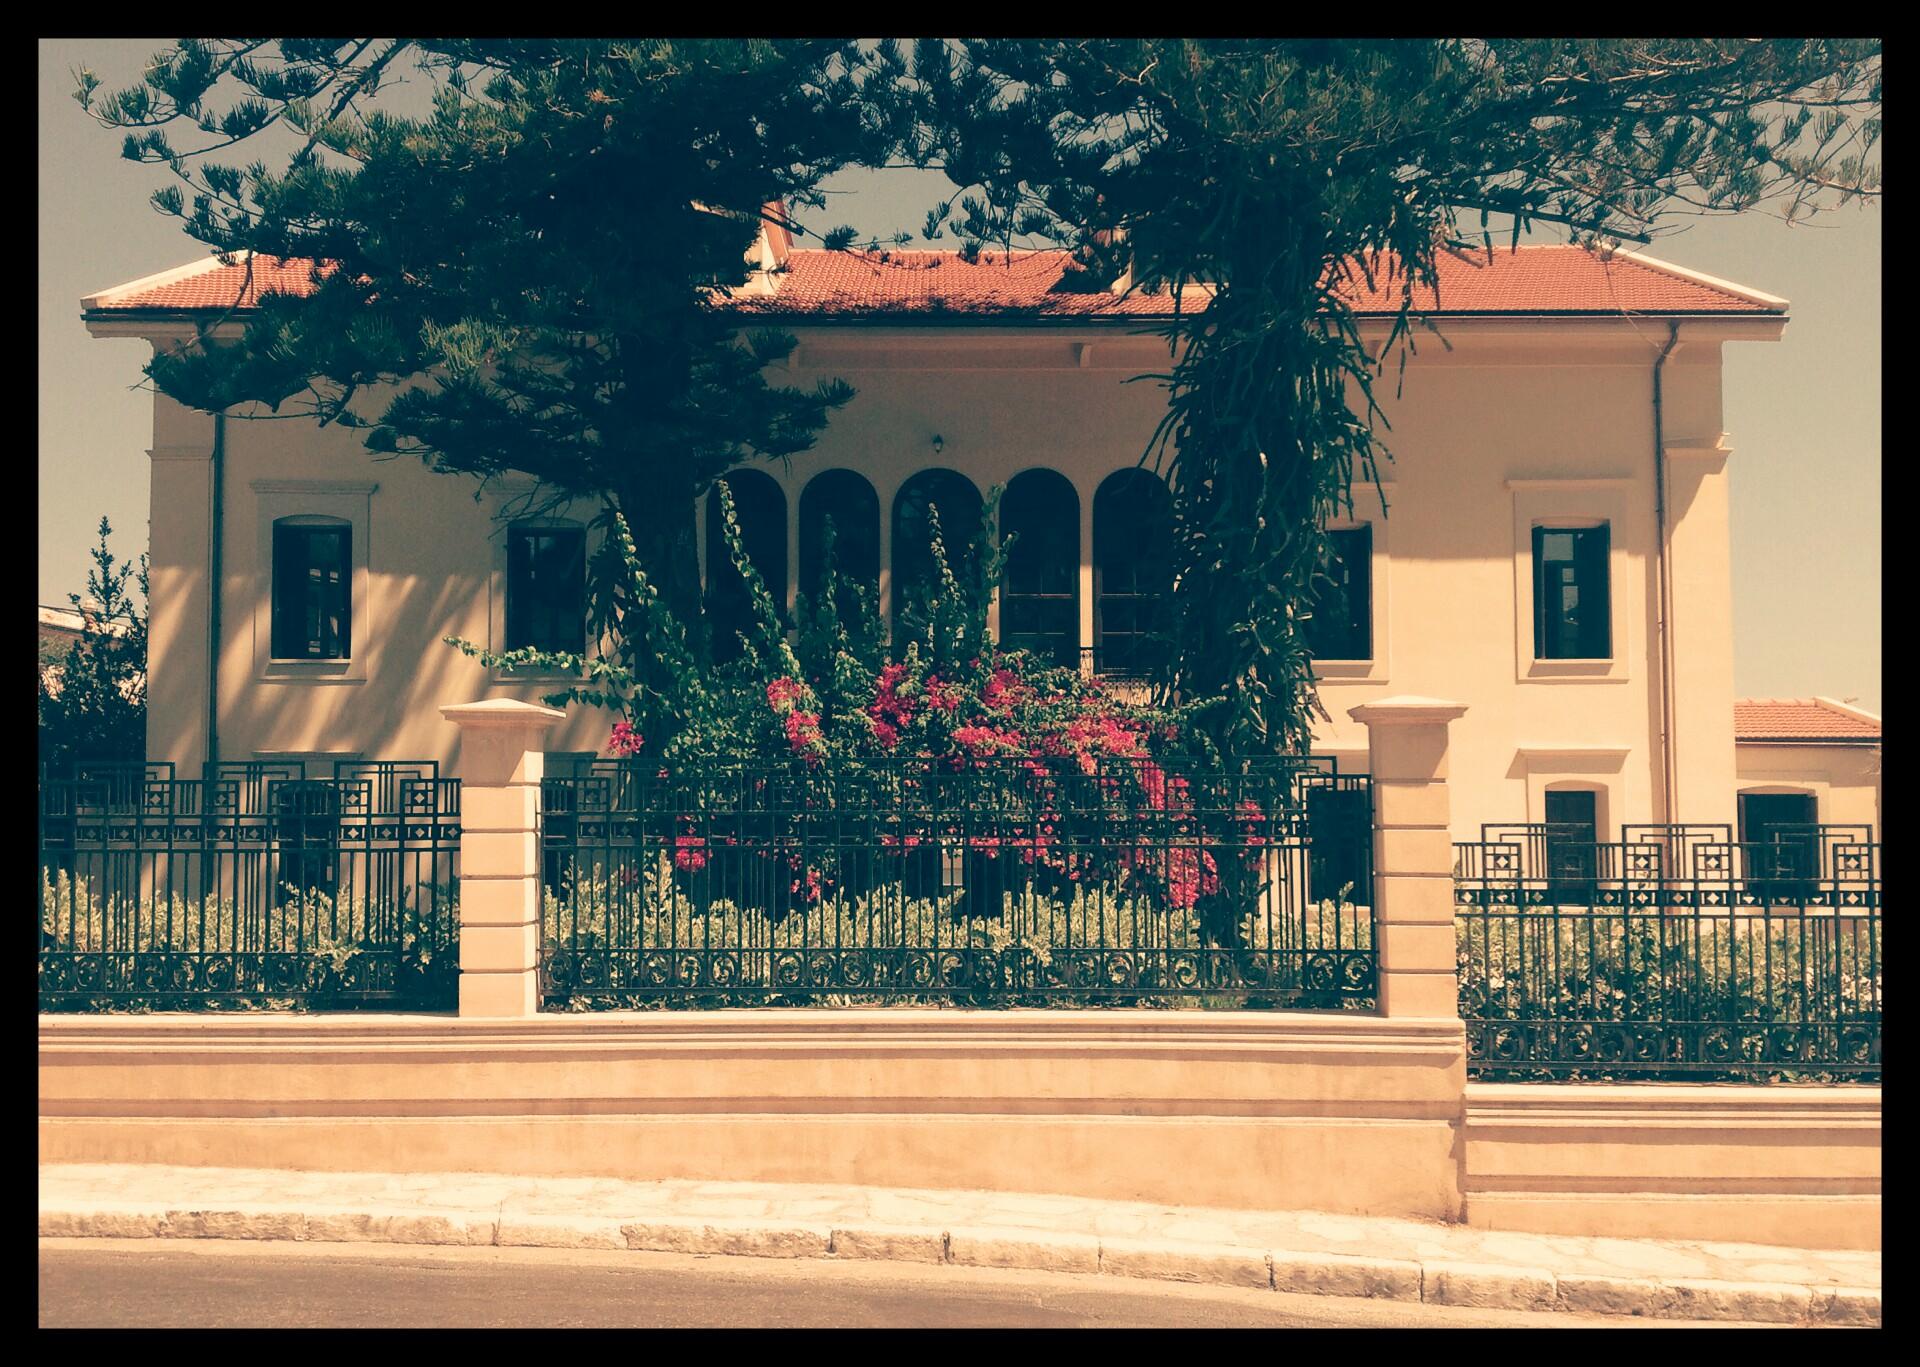 Cover image of this place Residence of Eleftherios Venizelos